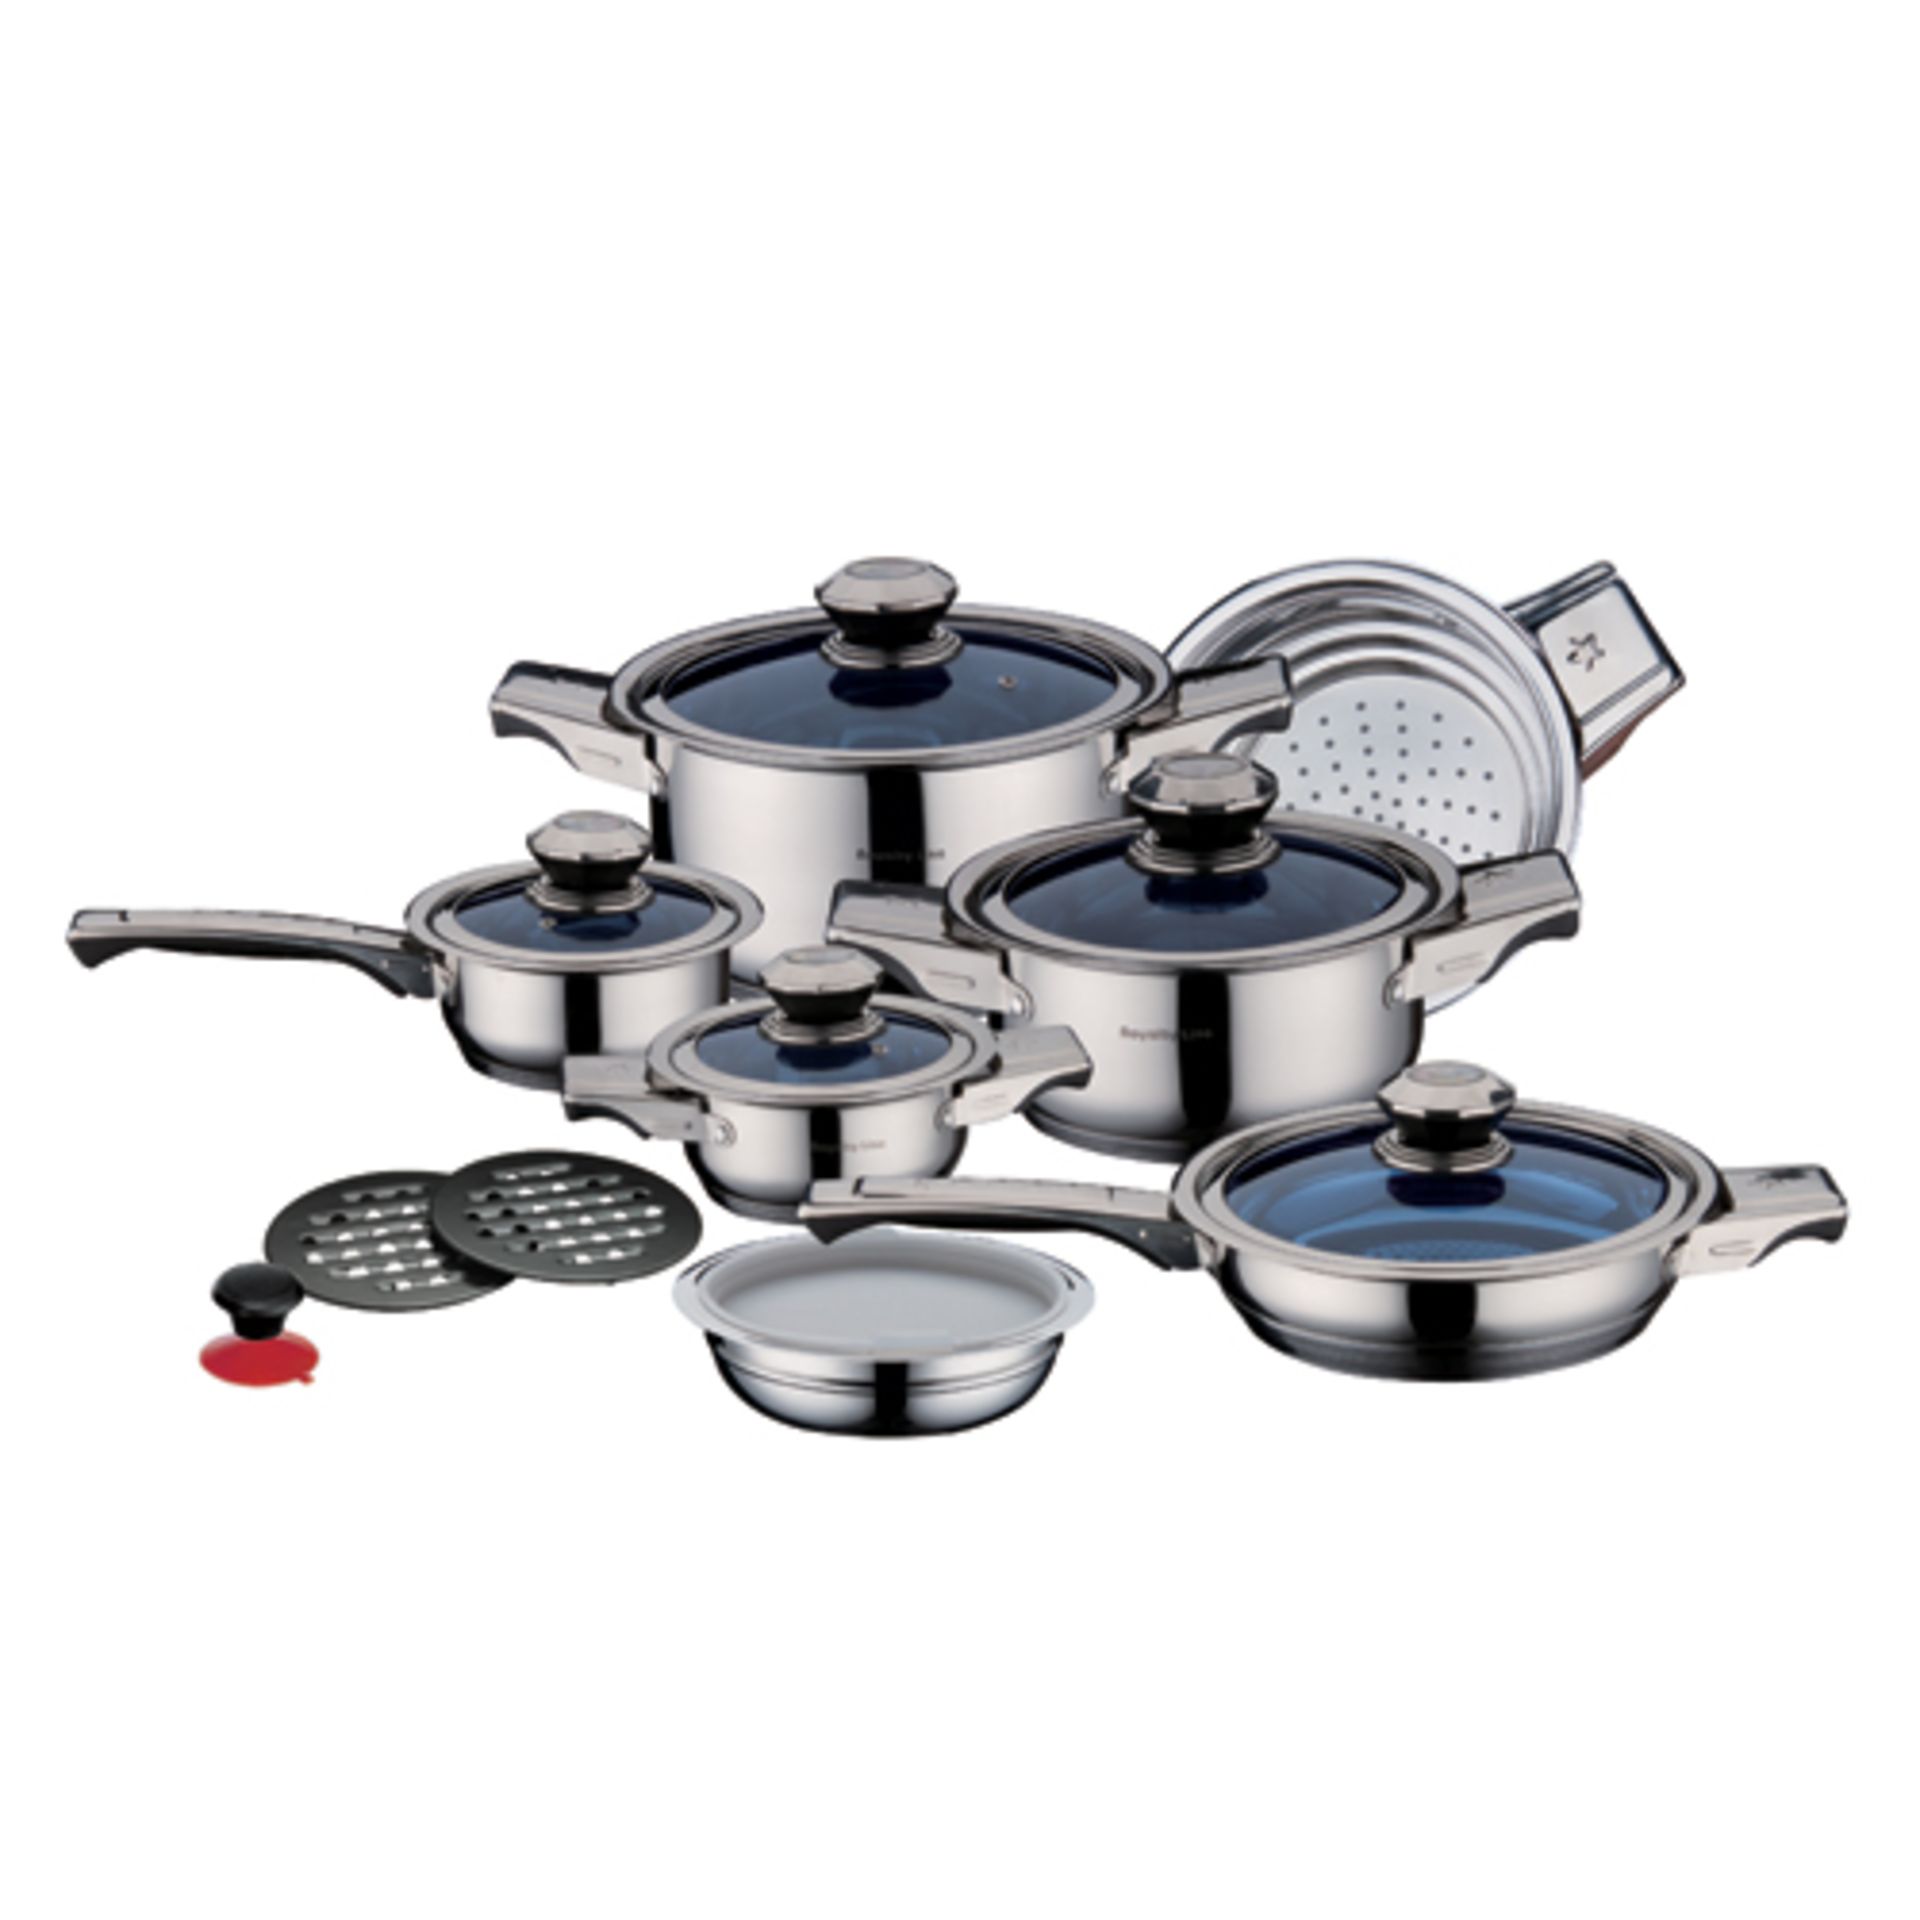 V 16pc Precision Royalty Line Switzerland Stainless Steel Cooking Set With Glass Lids RRP 1650.00